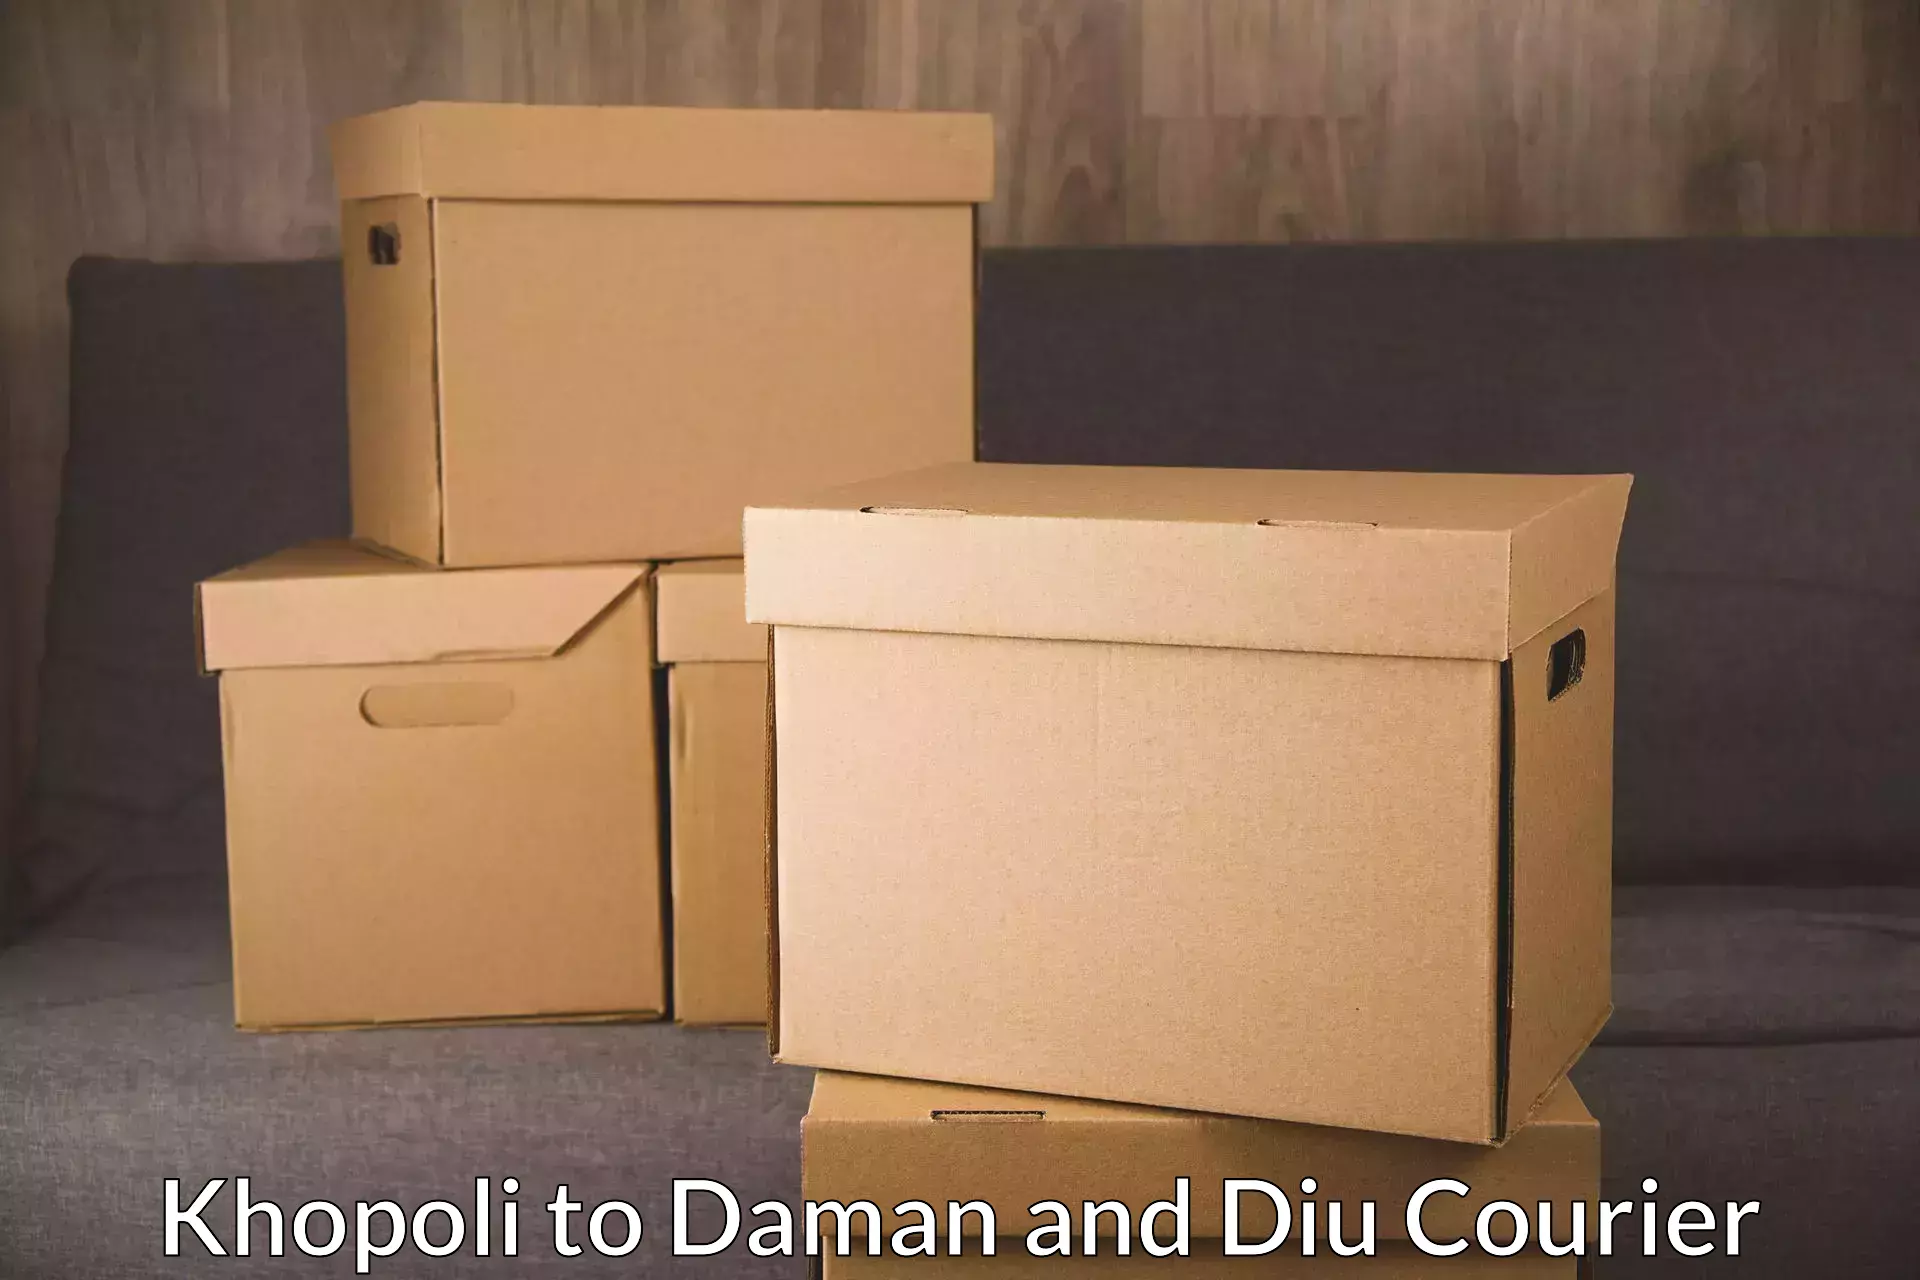 Round-the-clock parcel delivery Khopoli to Daman